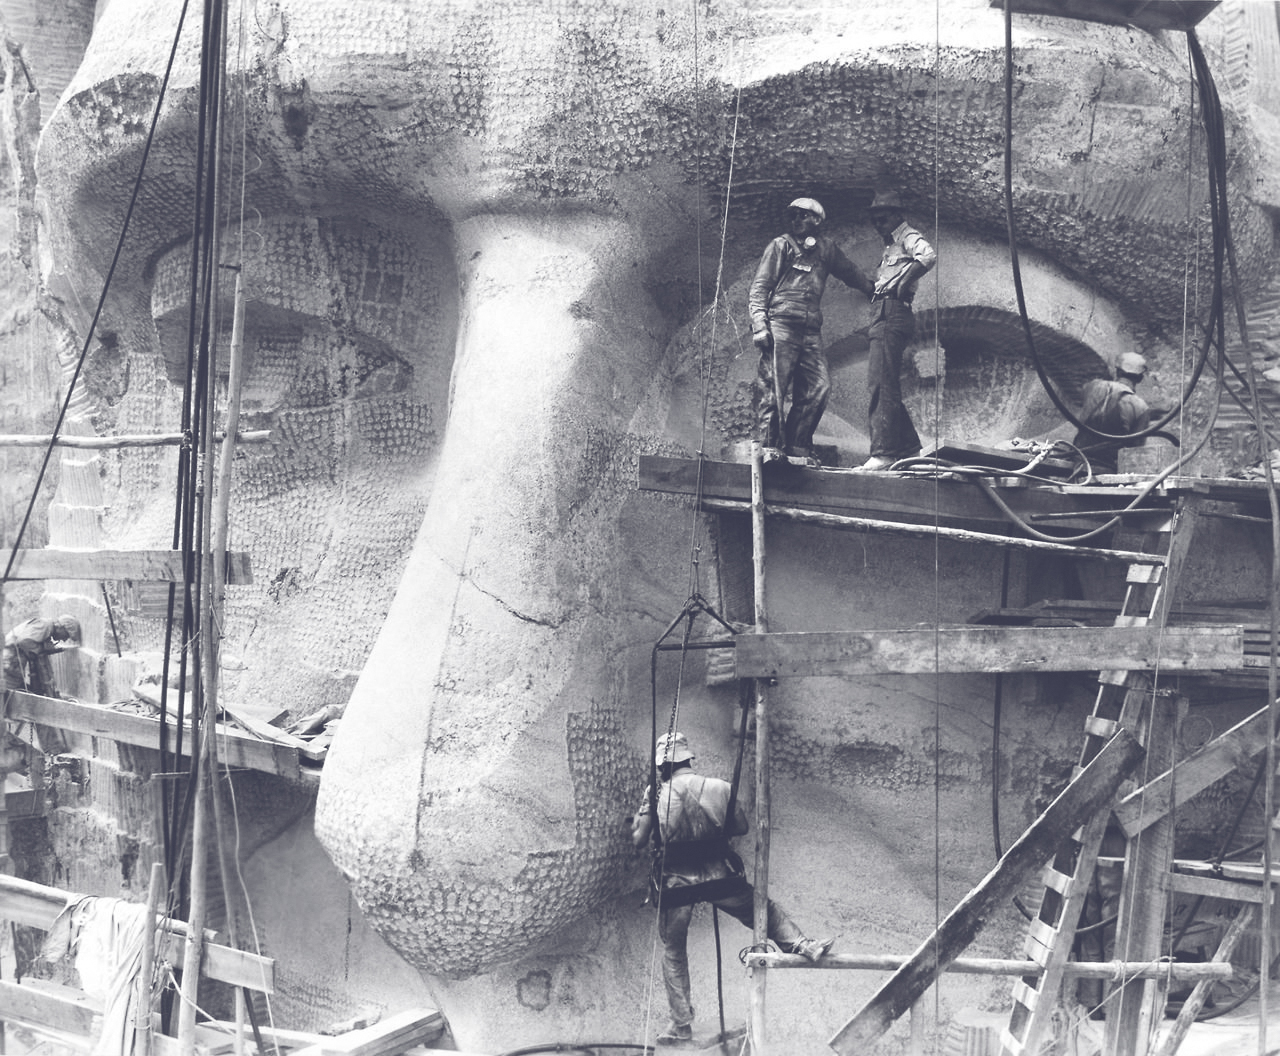 CONSTRUCTION-mt-rushmore-workers-scaffolding.jpg